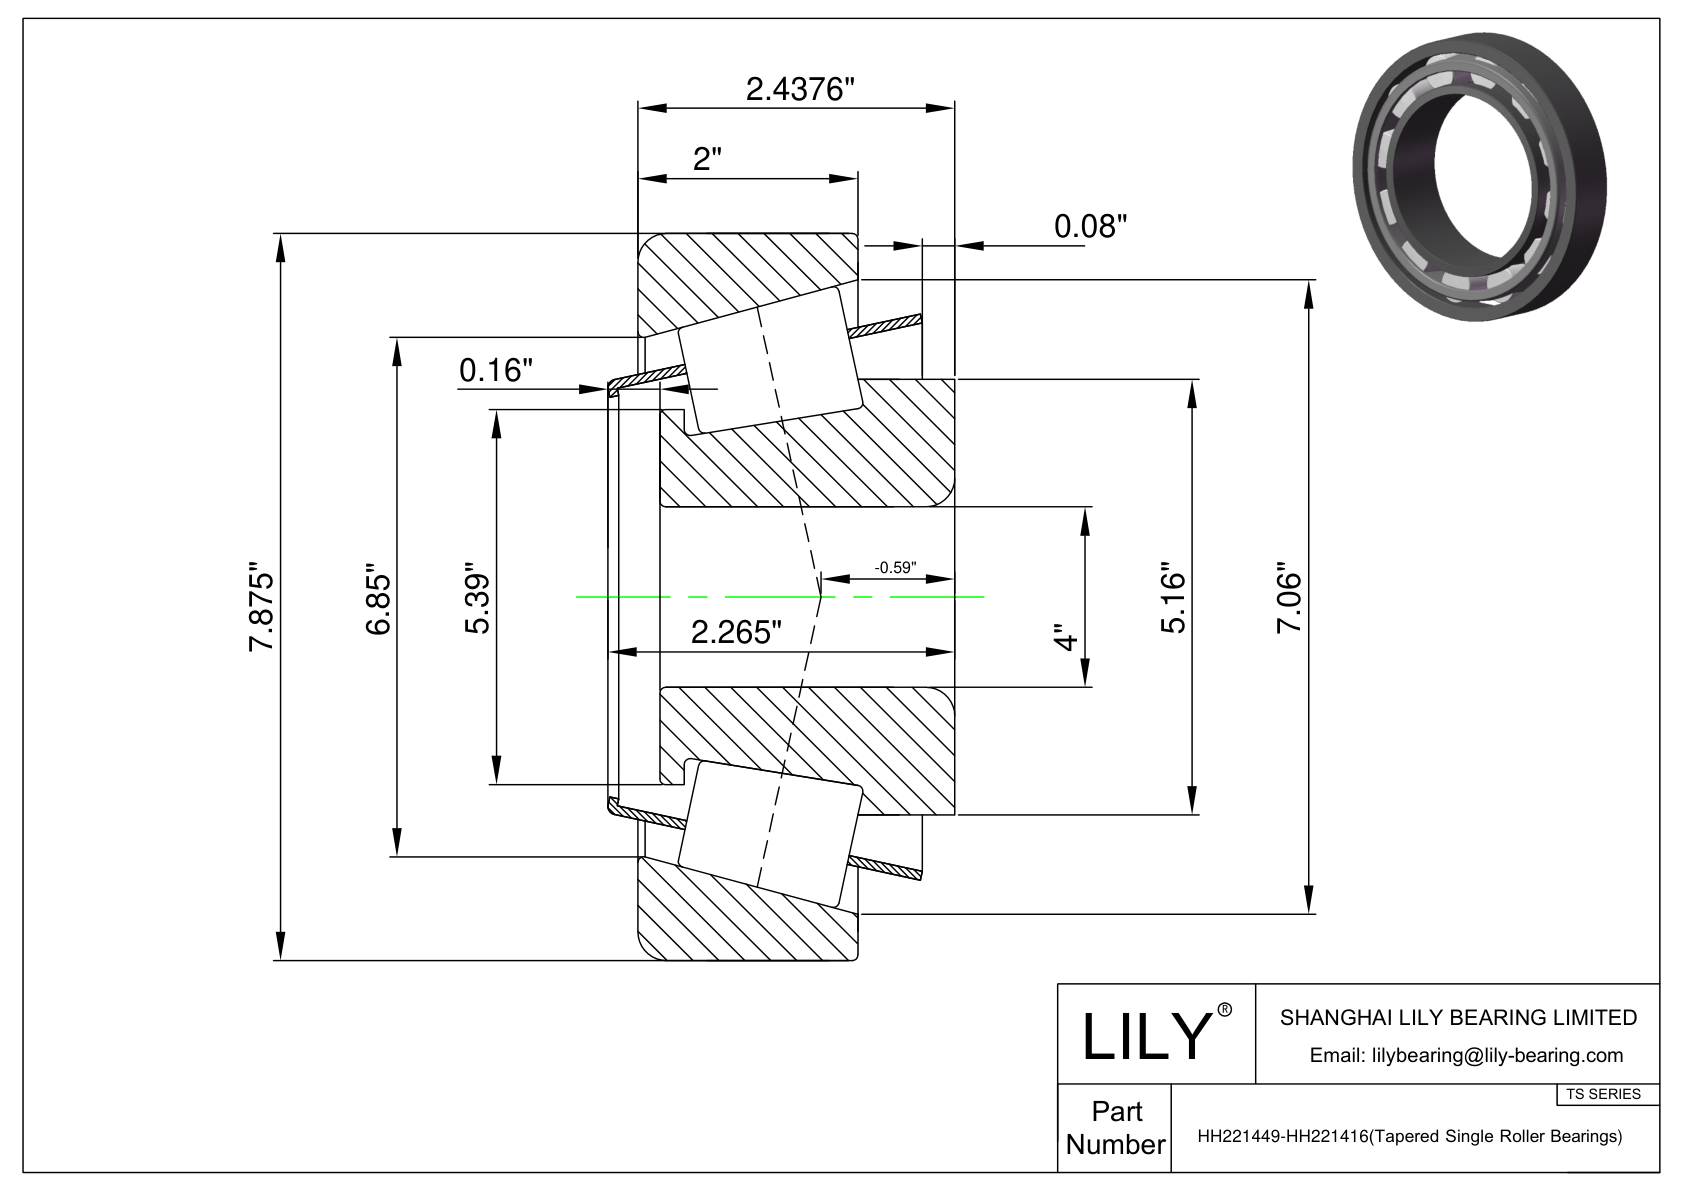 HH221449-HH221416 TS (Tapered Single Roller Bearings) (Imperial) cad drawing